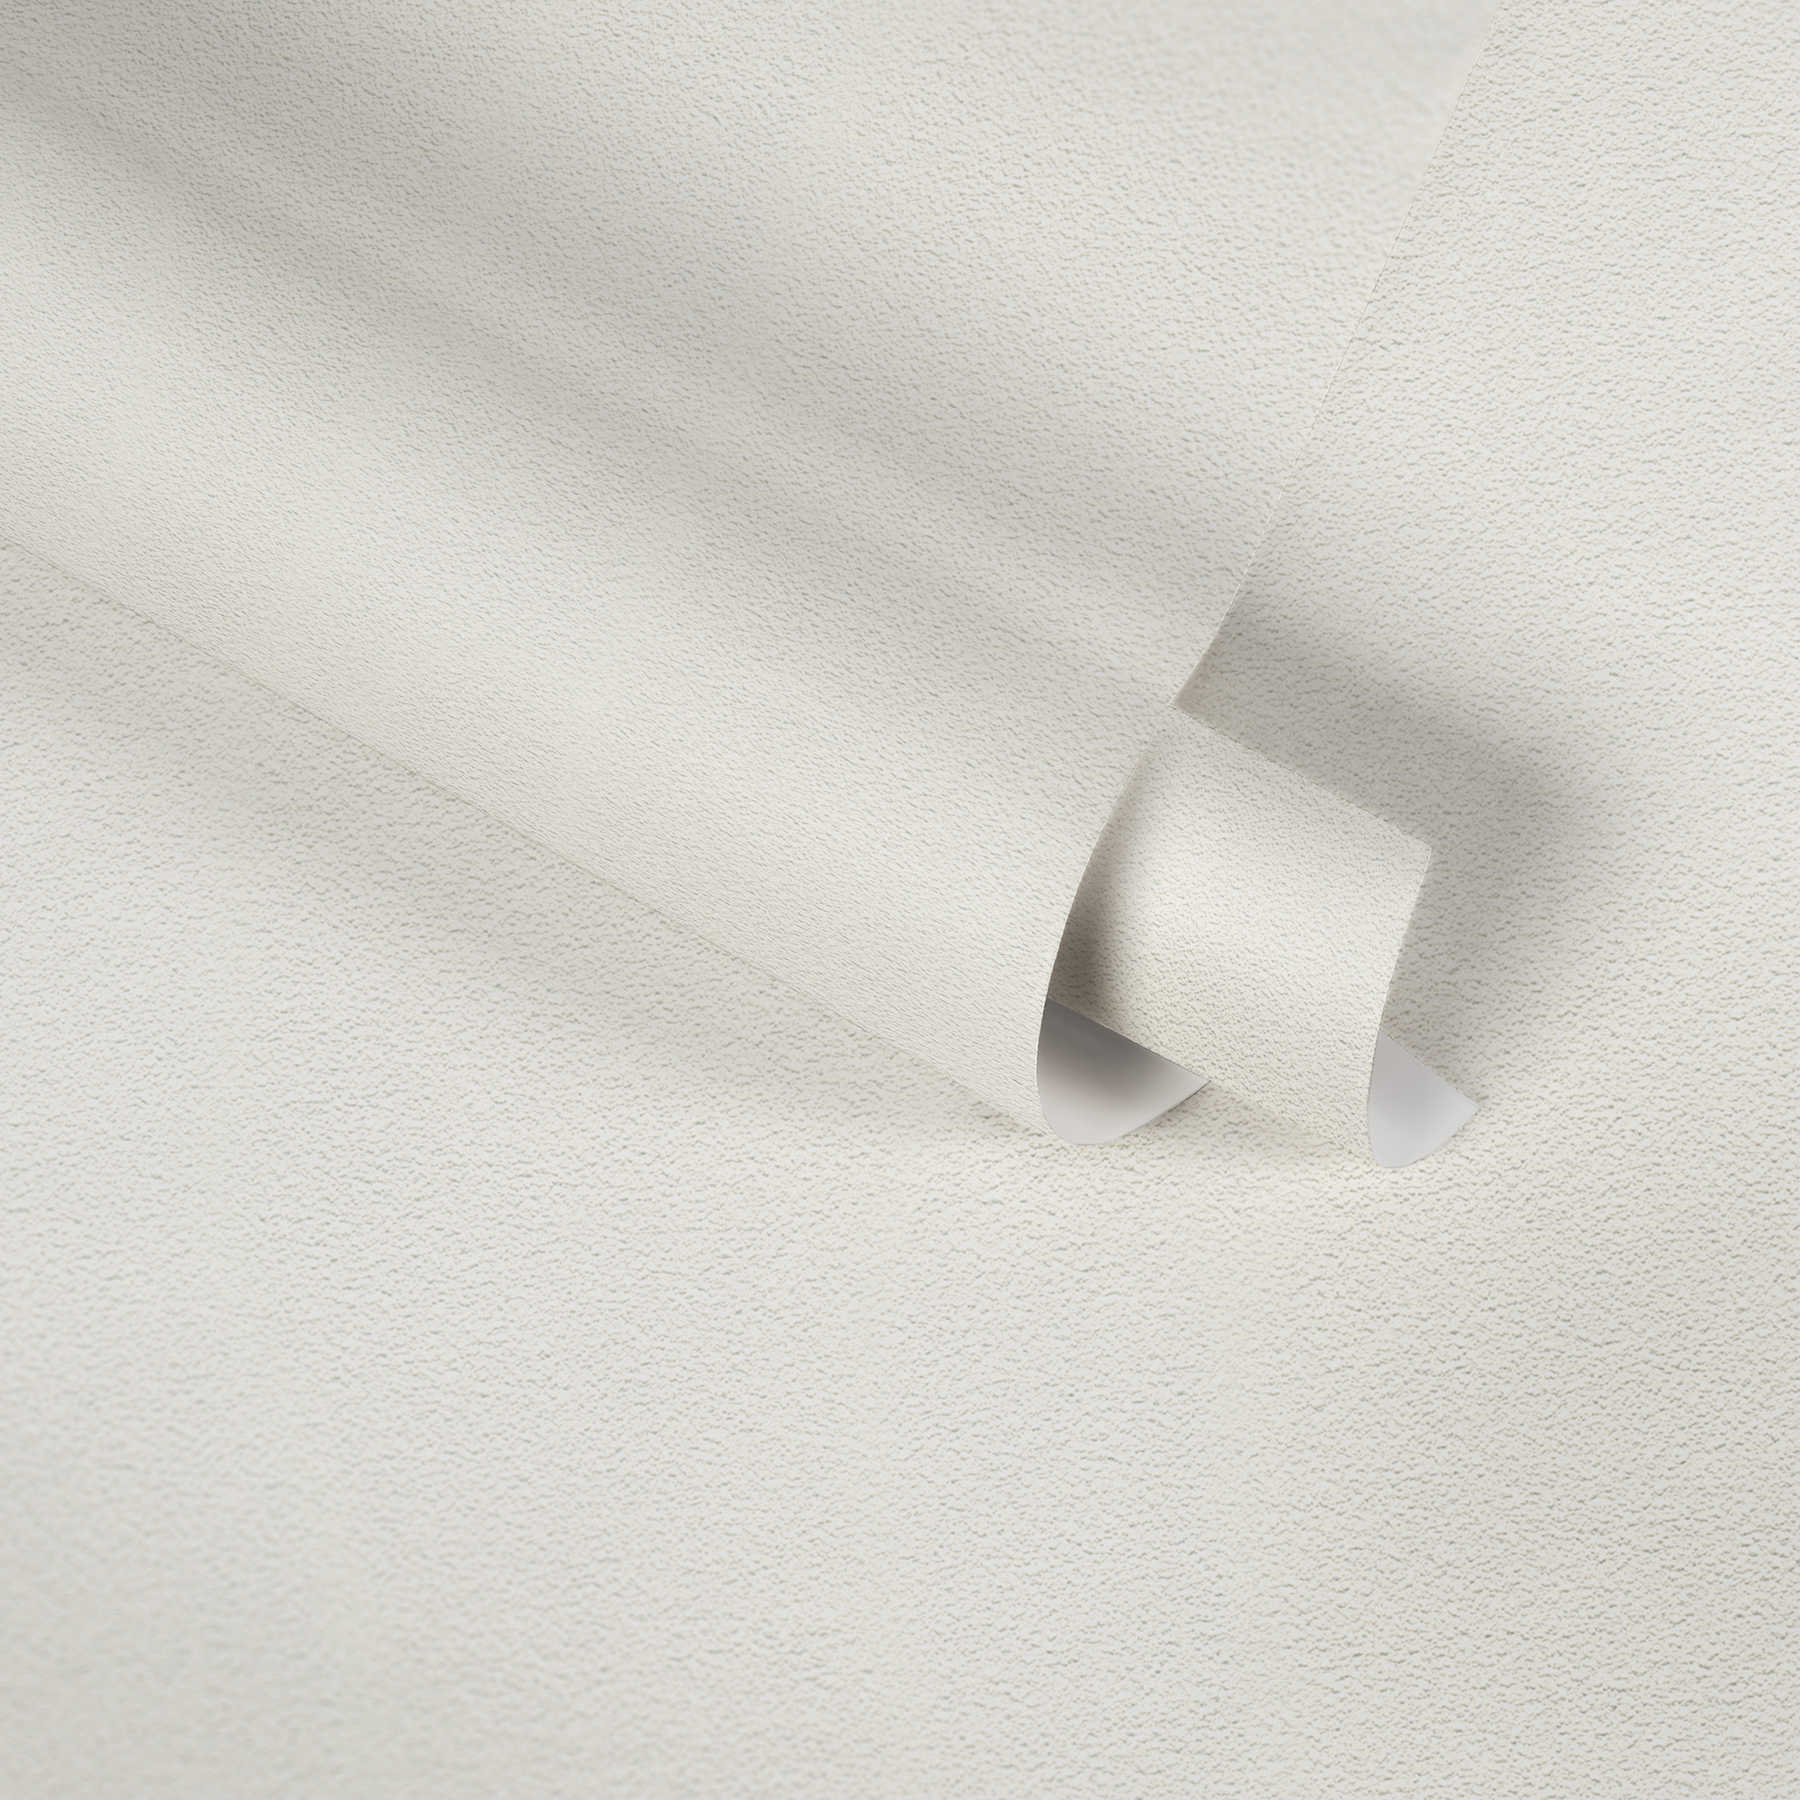             Plain wallpaper white with flat foam structure
        